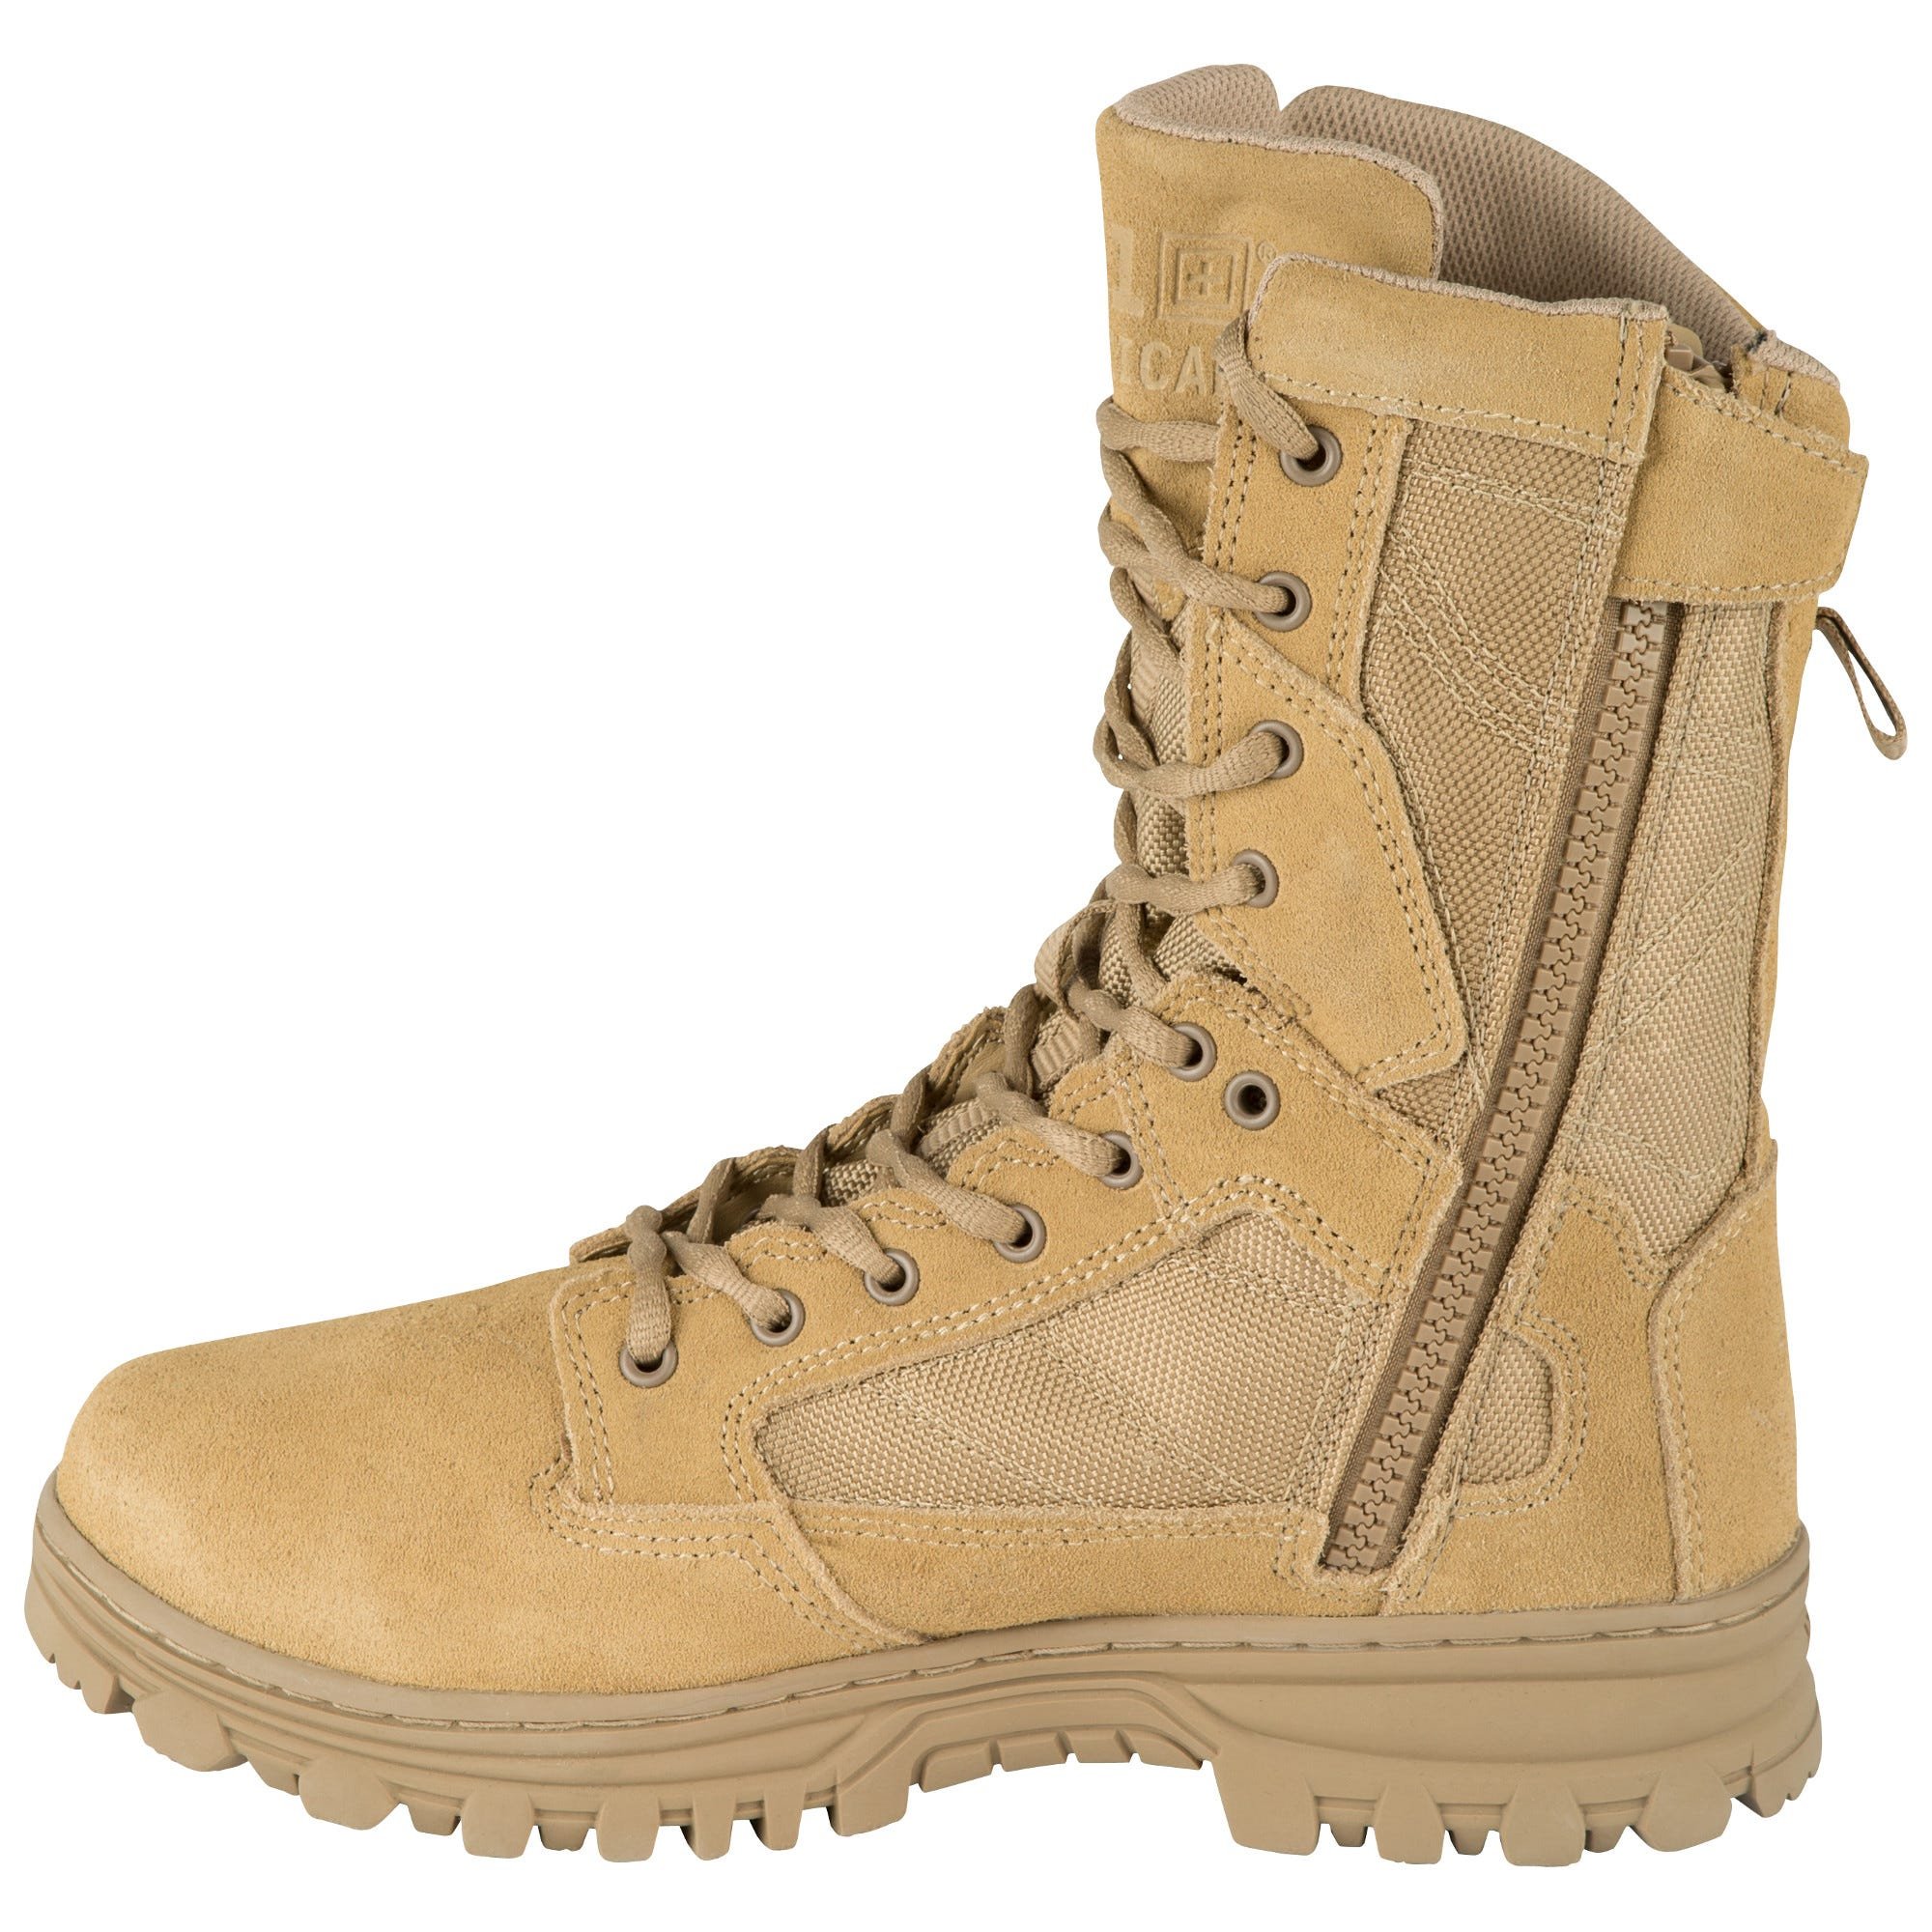 5.11 Work Gear EVO 8-Inch Waterproof Boots, Oil/Slip-Resistant, OrthoLite Insole, Coyote, 4/Regular, Style 12347 - image 4 of 4